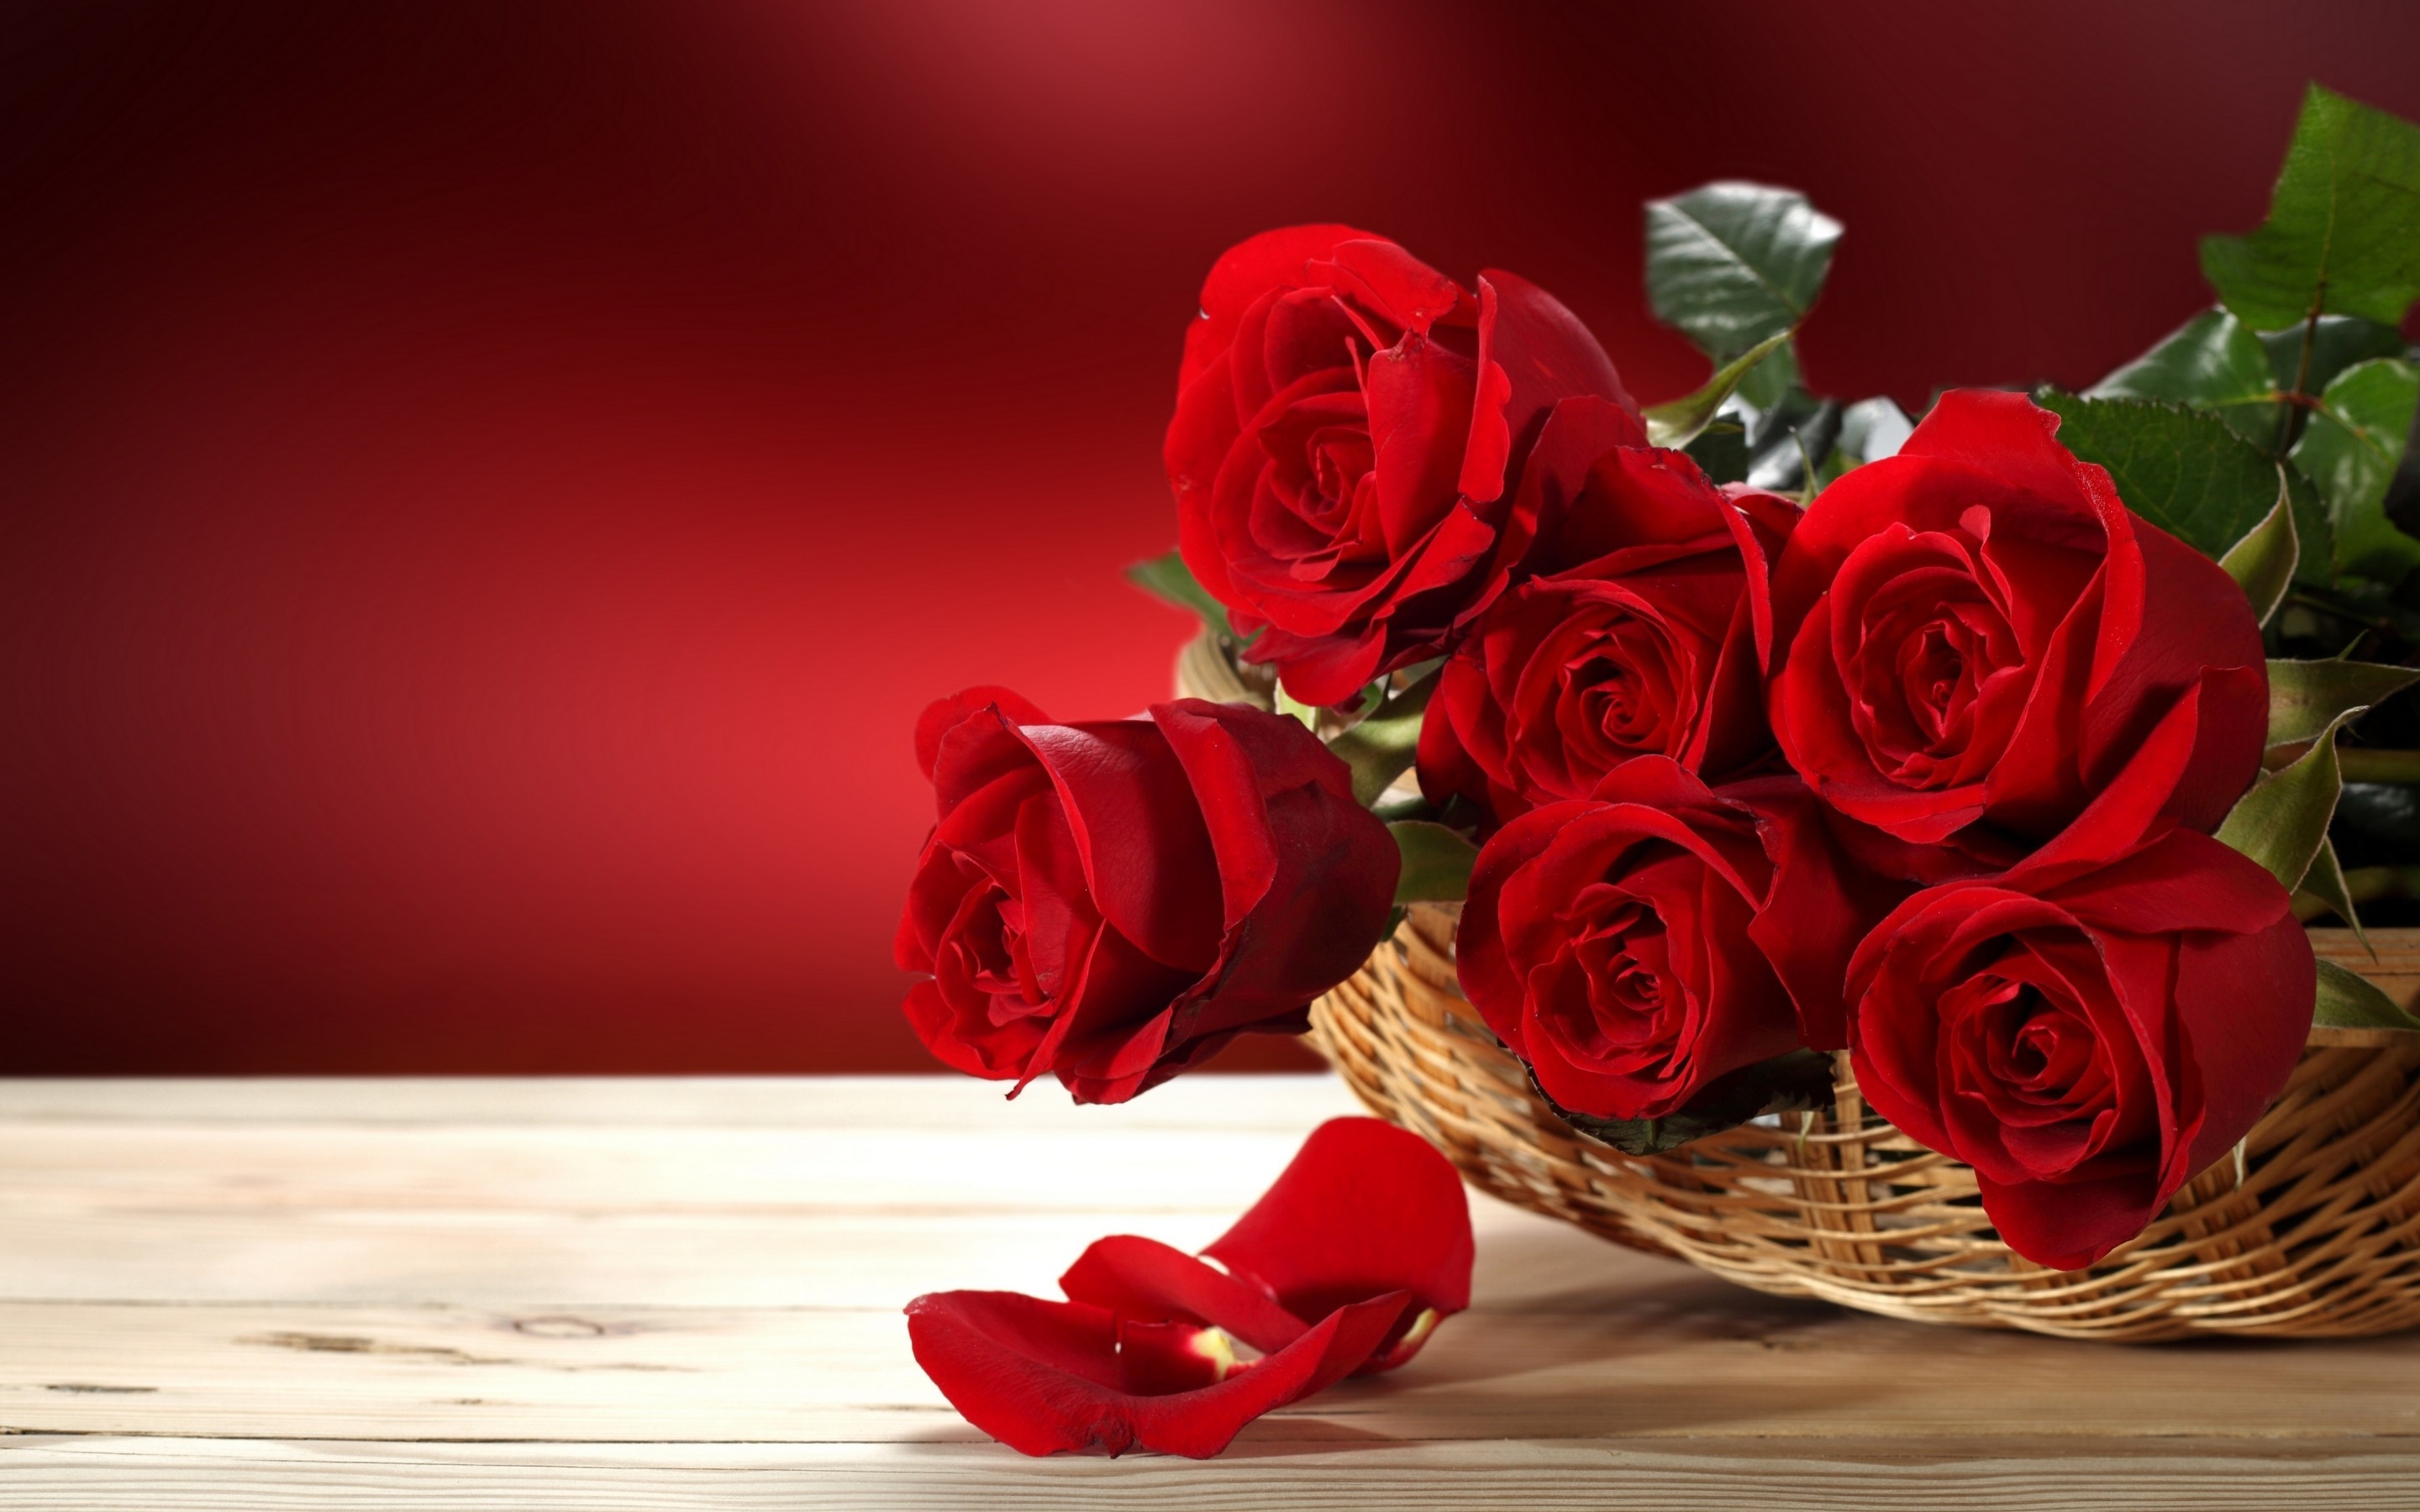 Fresh Red Roses for 2880 x 1800 Retina Display resolution